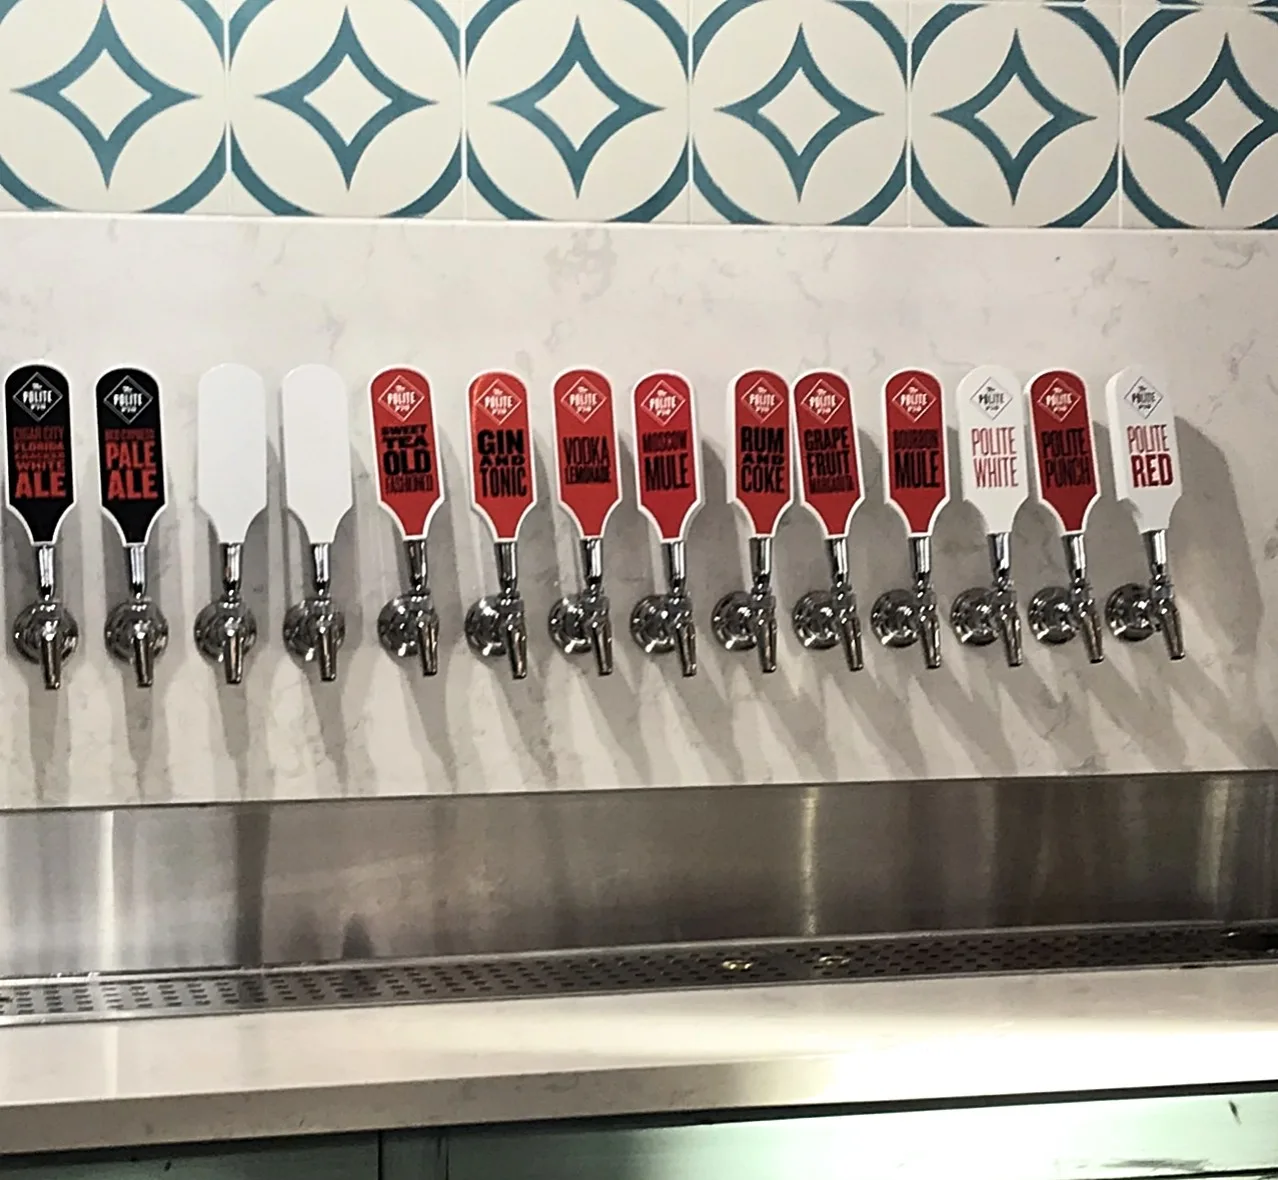 14 different beers on tap